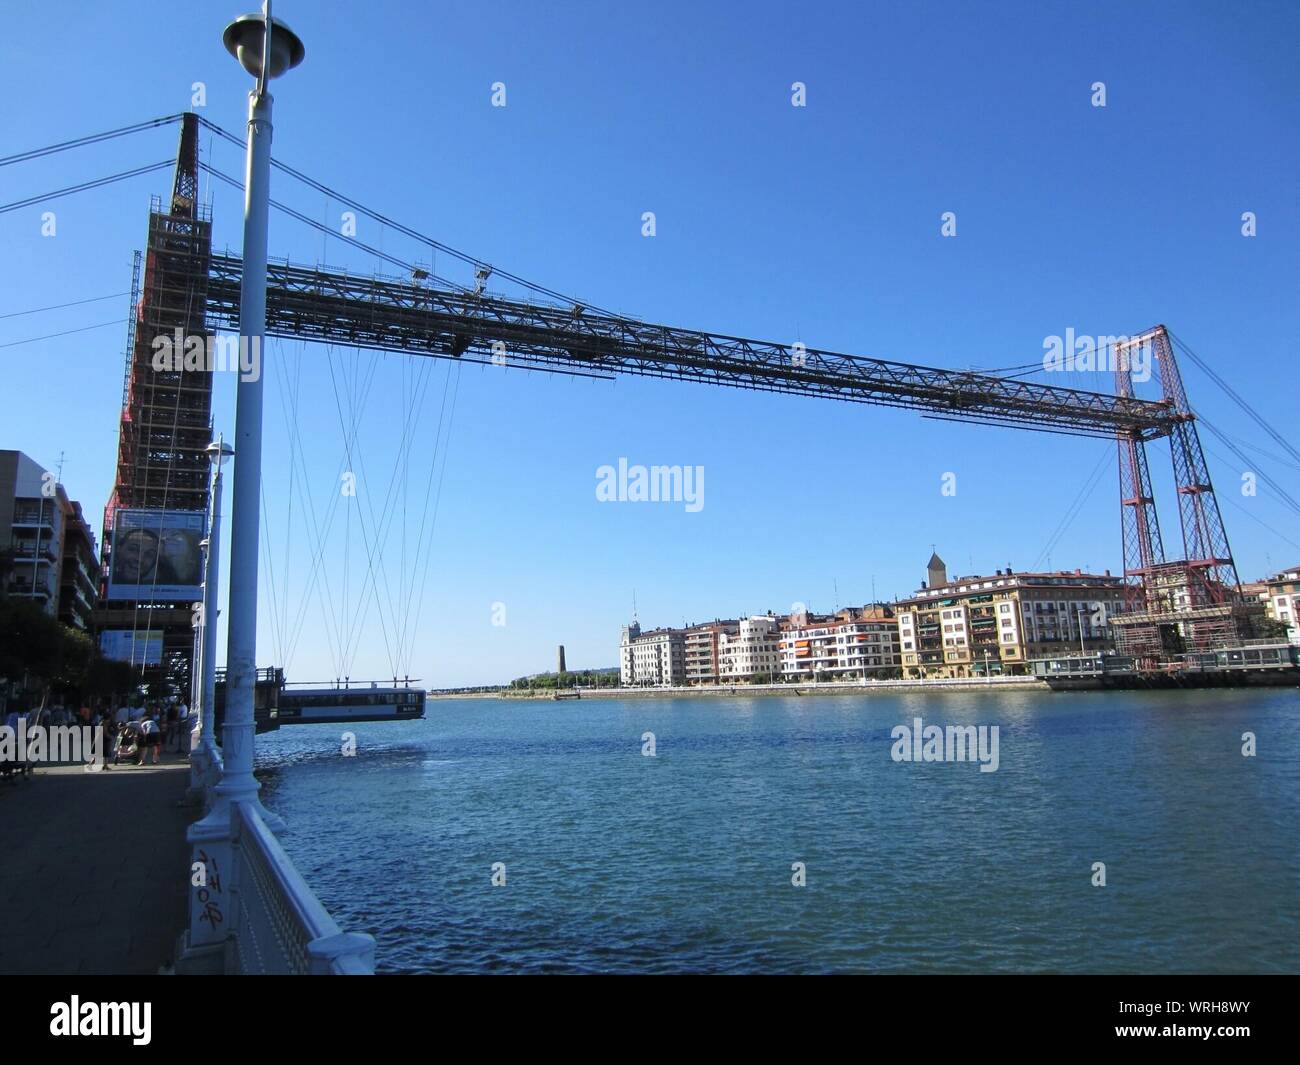 Vizcaya Bridge Against Clear Blue Sky Over Nervion River In City Stock Photo